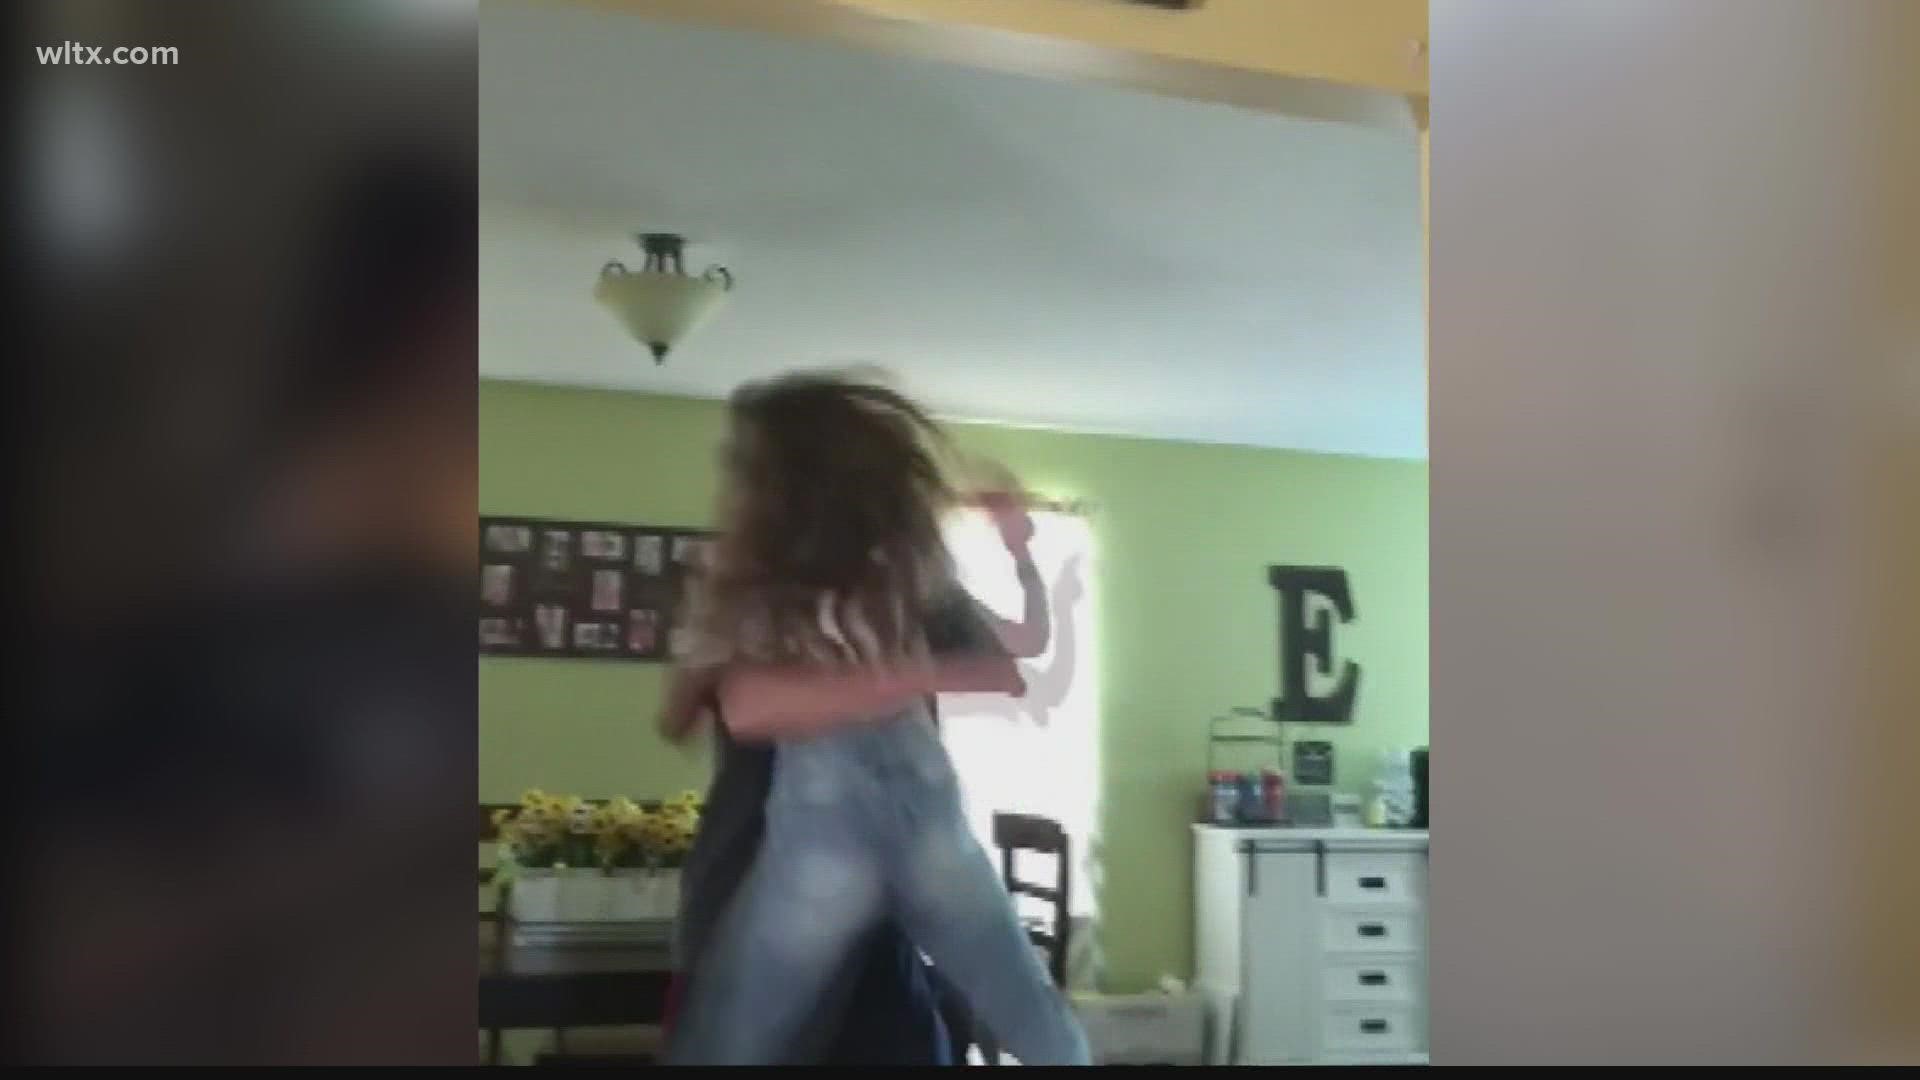 Tatiana Erichsen got a special surprise when her father came home from deployment early.